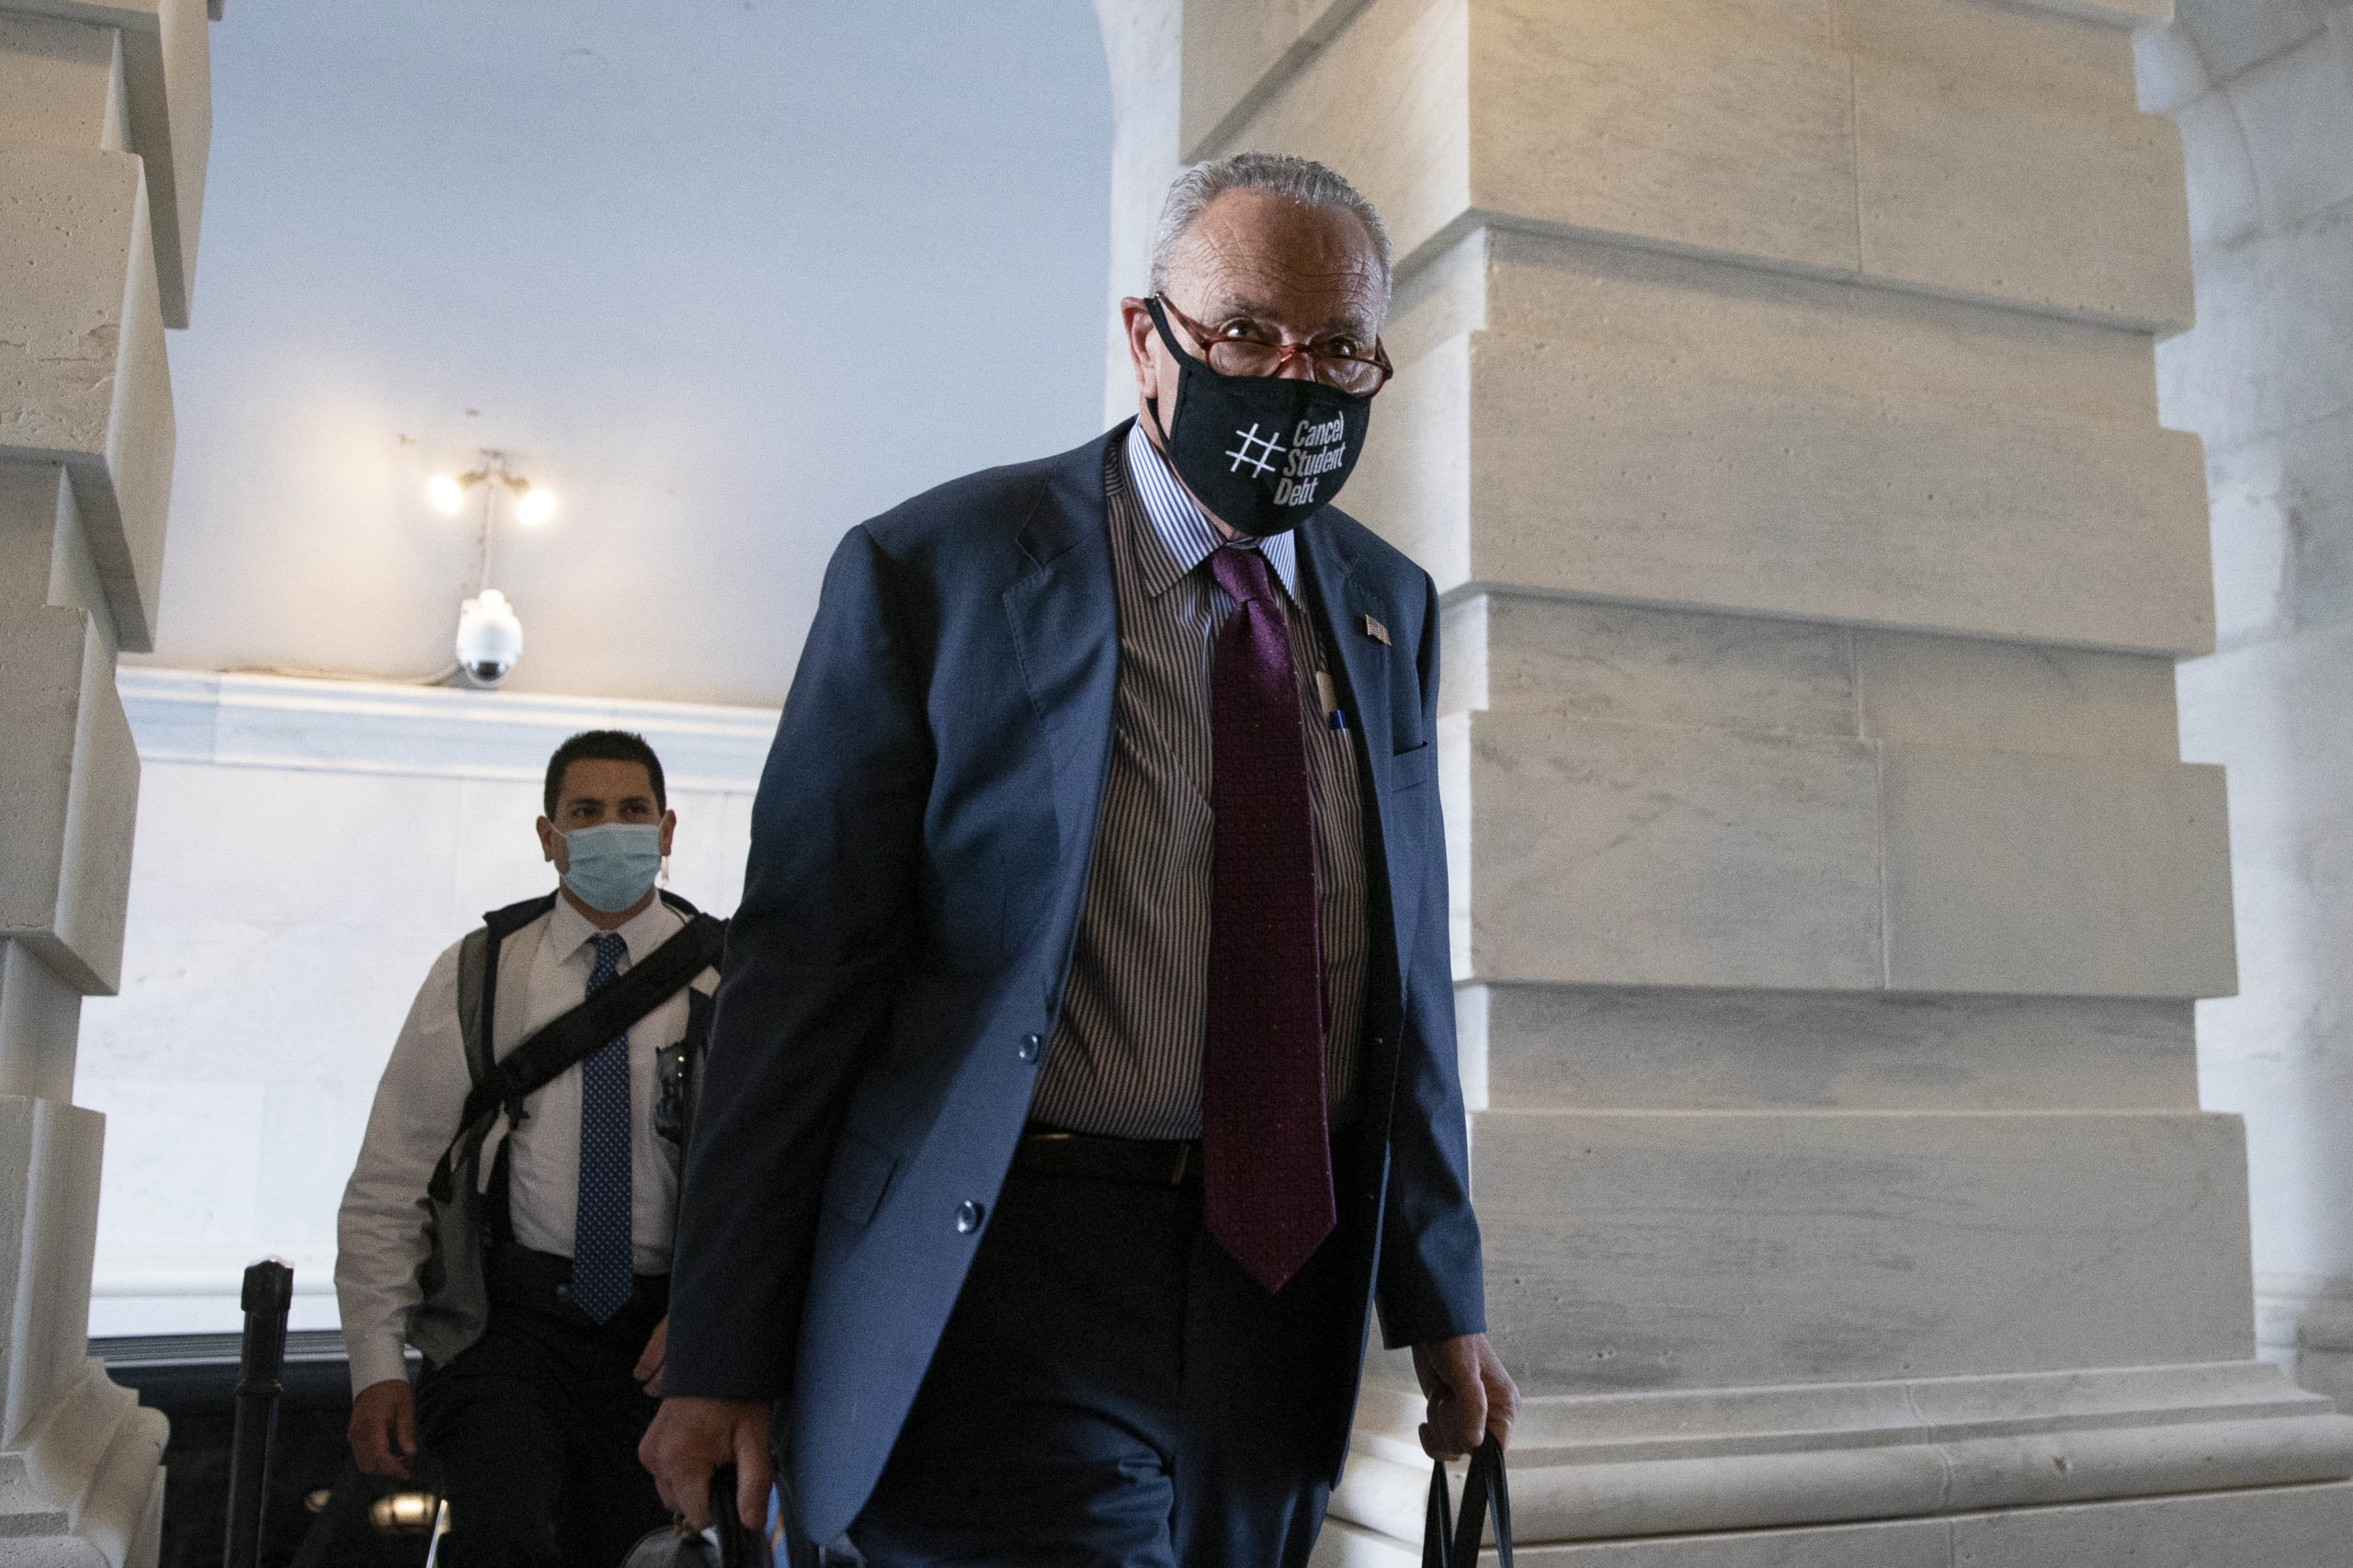 Senate Majority Leader Chuck Schumer arrives at the Capitol Saturday, when the Senate is convening in a rare session to advance its infrastructure bill. (Sarah Silbiger/Getty Images)